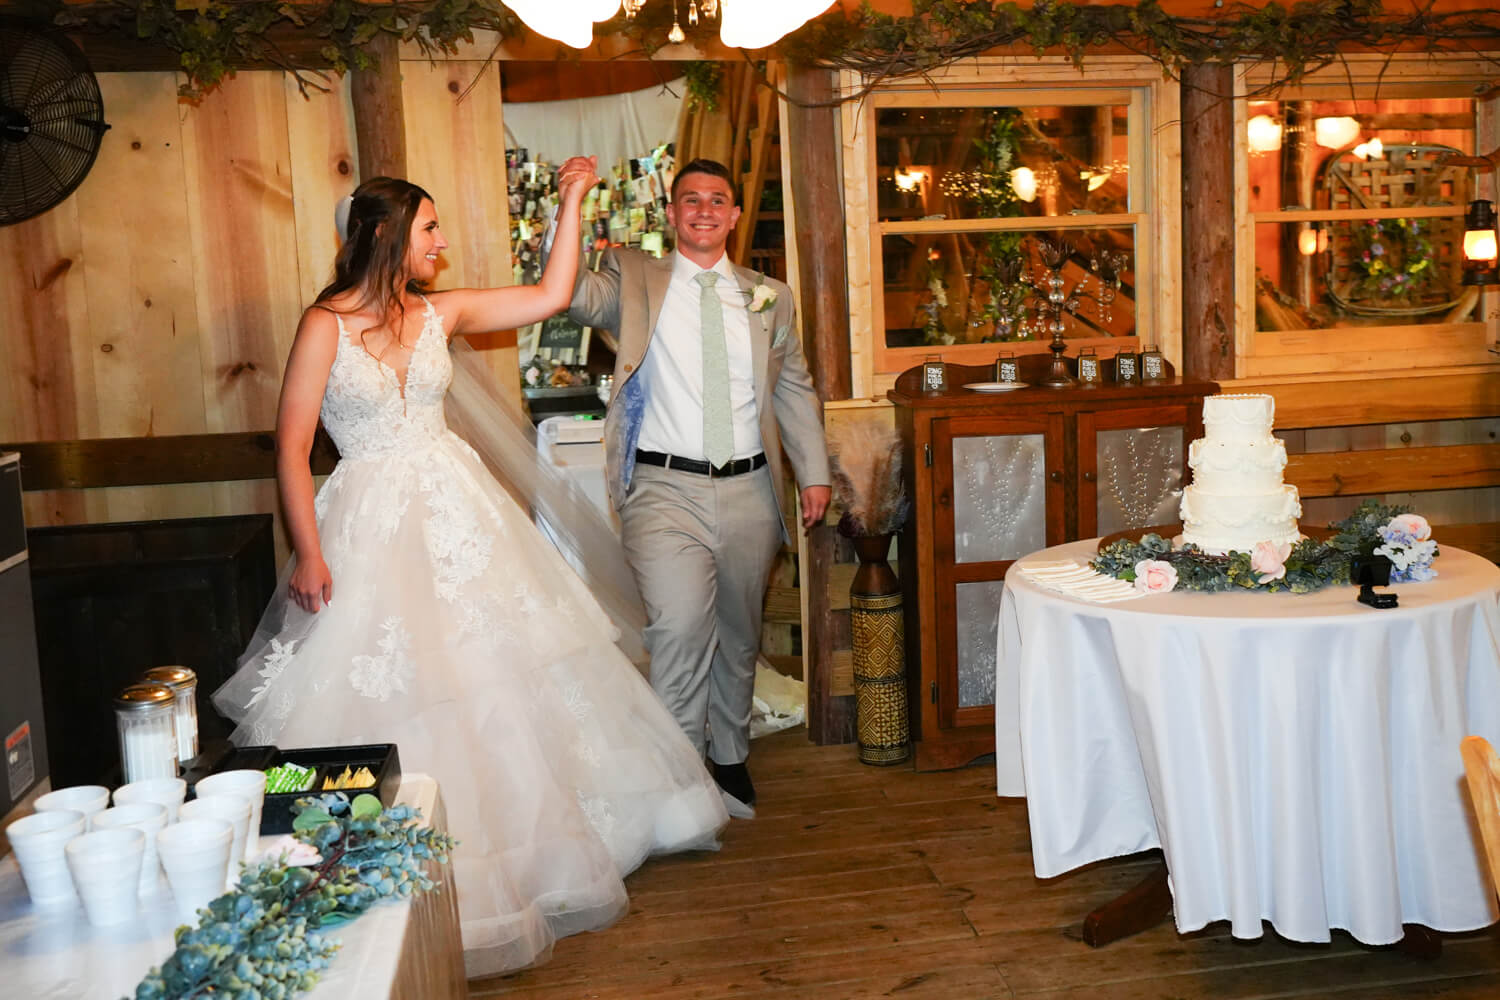 Wedding couple entering the reception hall in a country chic barn venue atmosphere